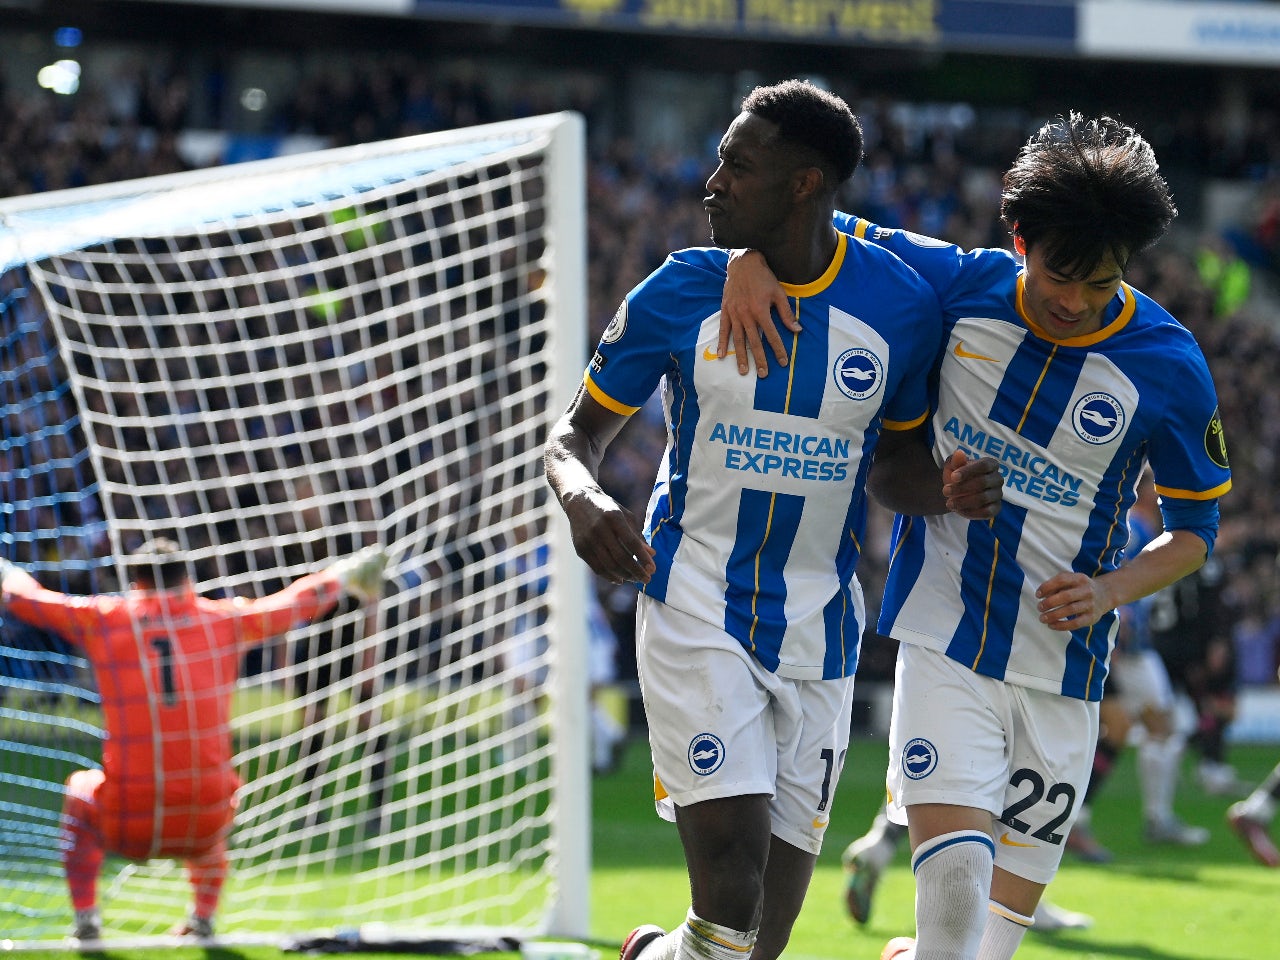 Brighton & Hove Albion and Brentford share the spoils in six-goal thriller